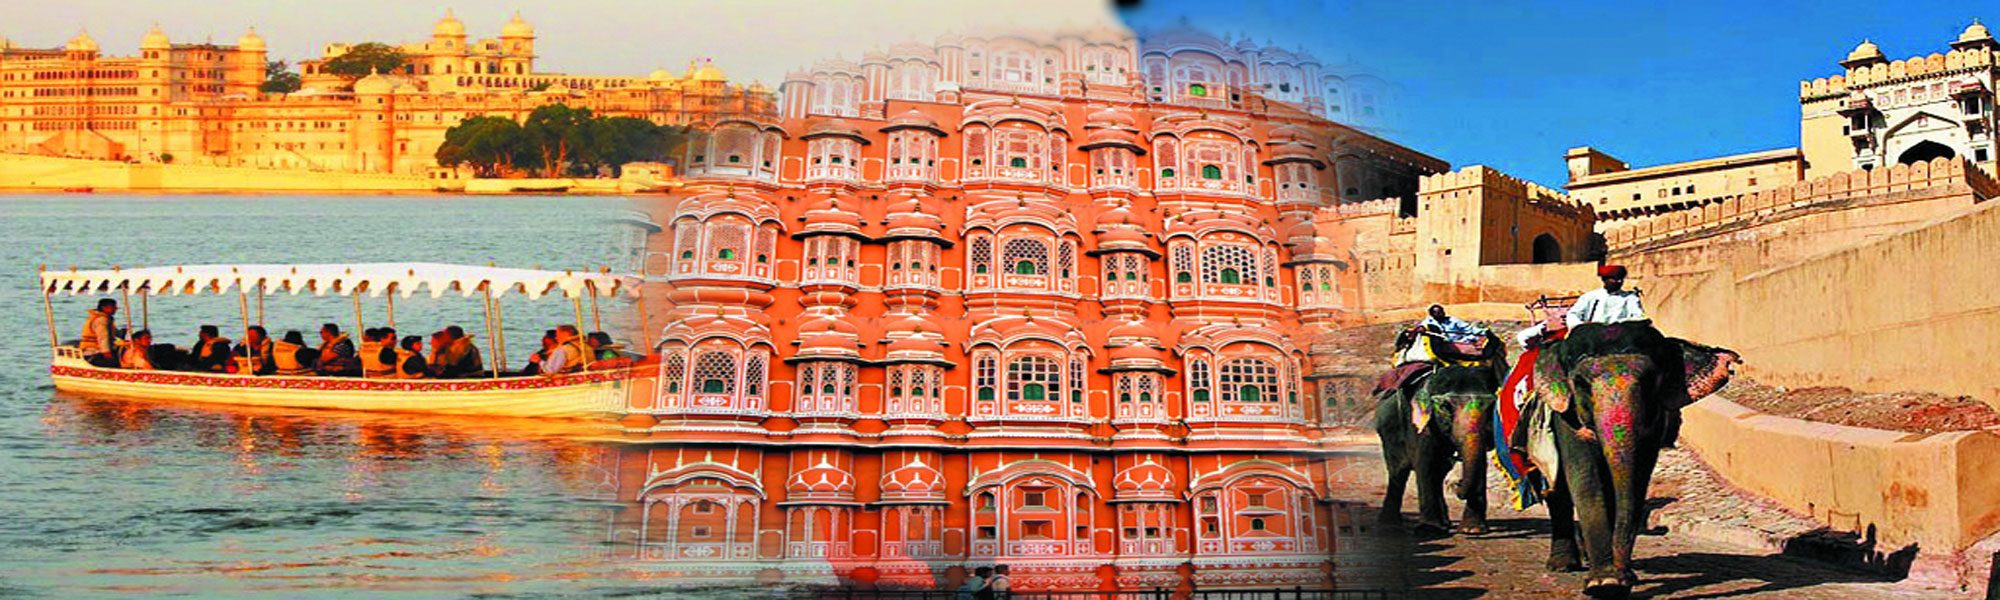 Heritage Haveli Tours in India with Desert Festival Tours in Rajasthan